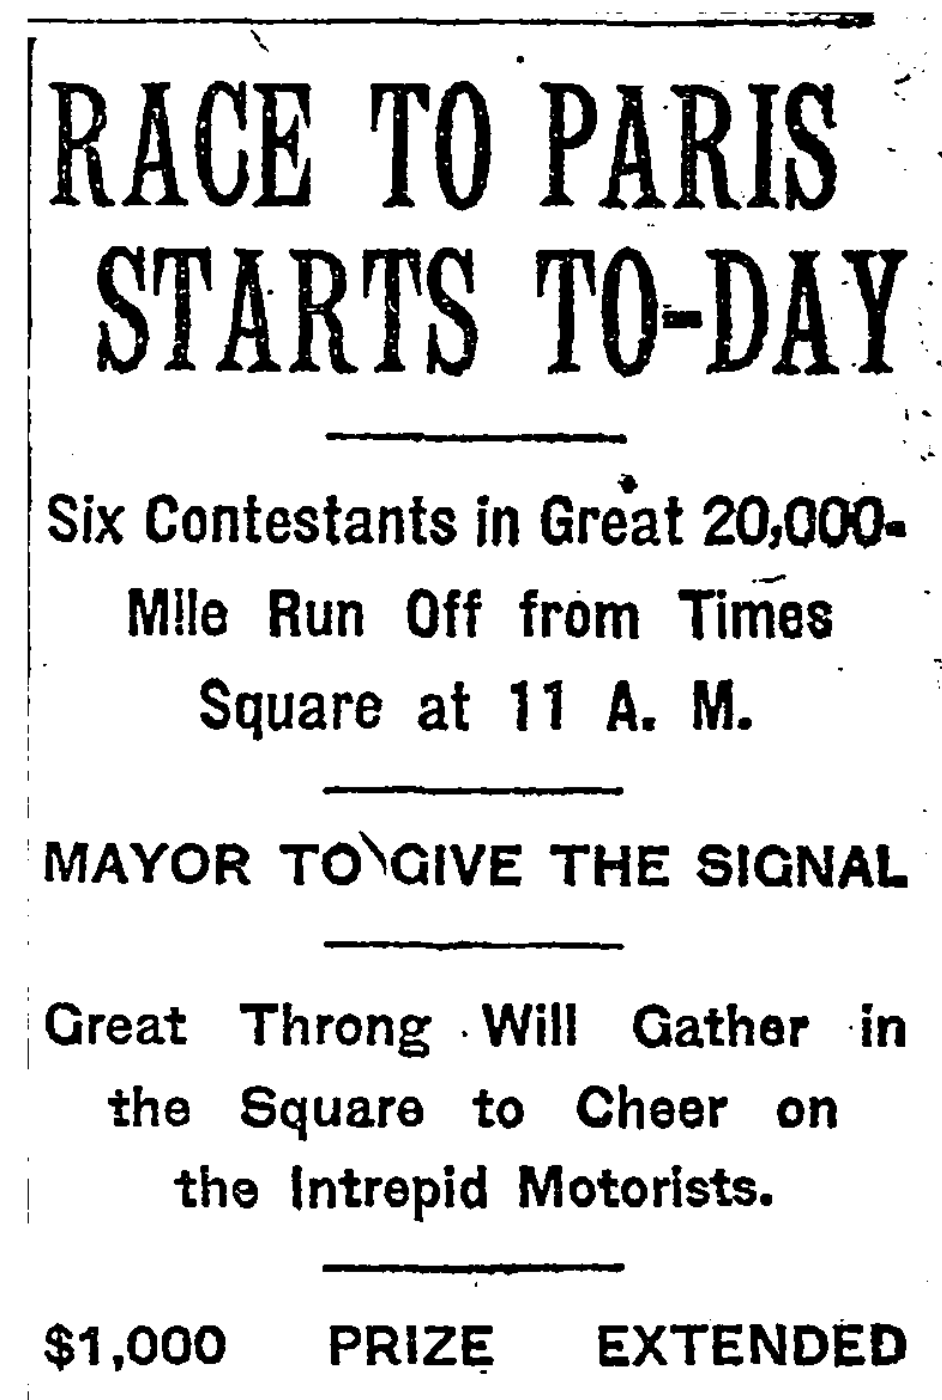 Race Day, as hyped in the New York Times on Feb. 12, 1908.